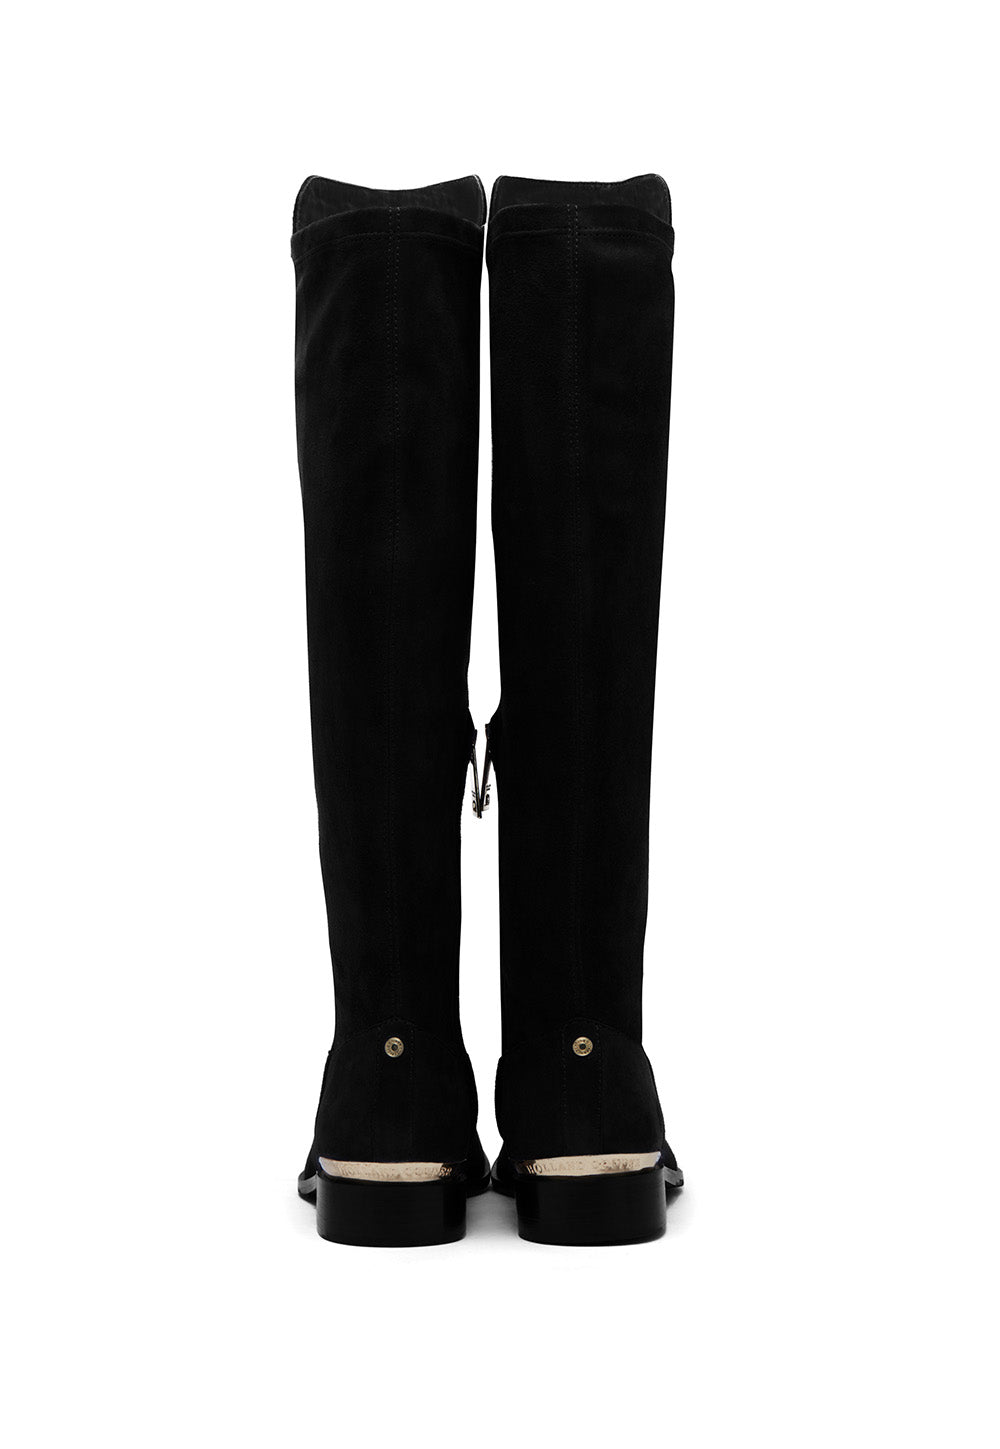 Albany Knee Boot - Black Suede sold by Angel Divine